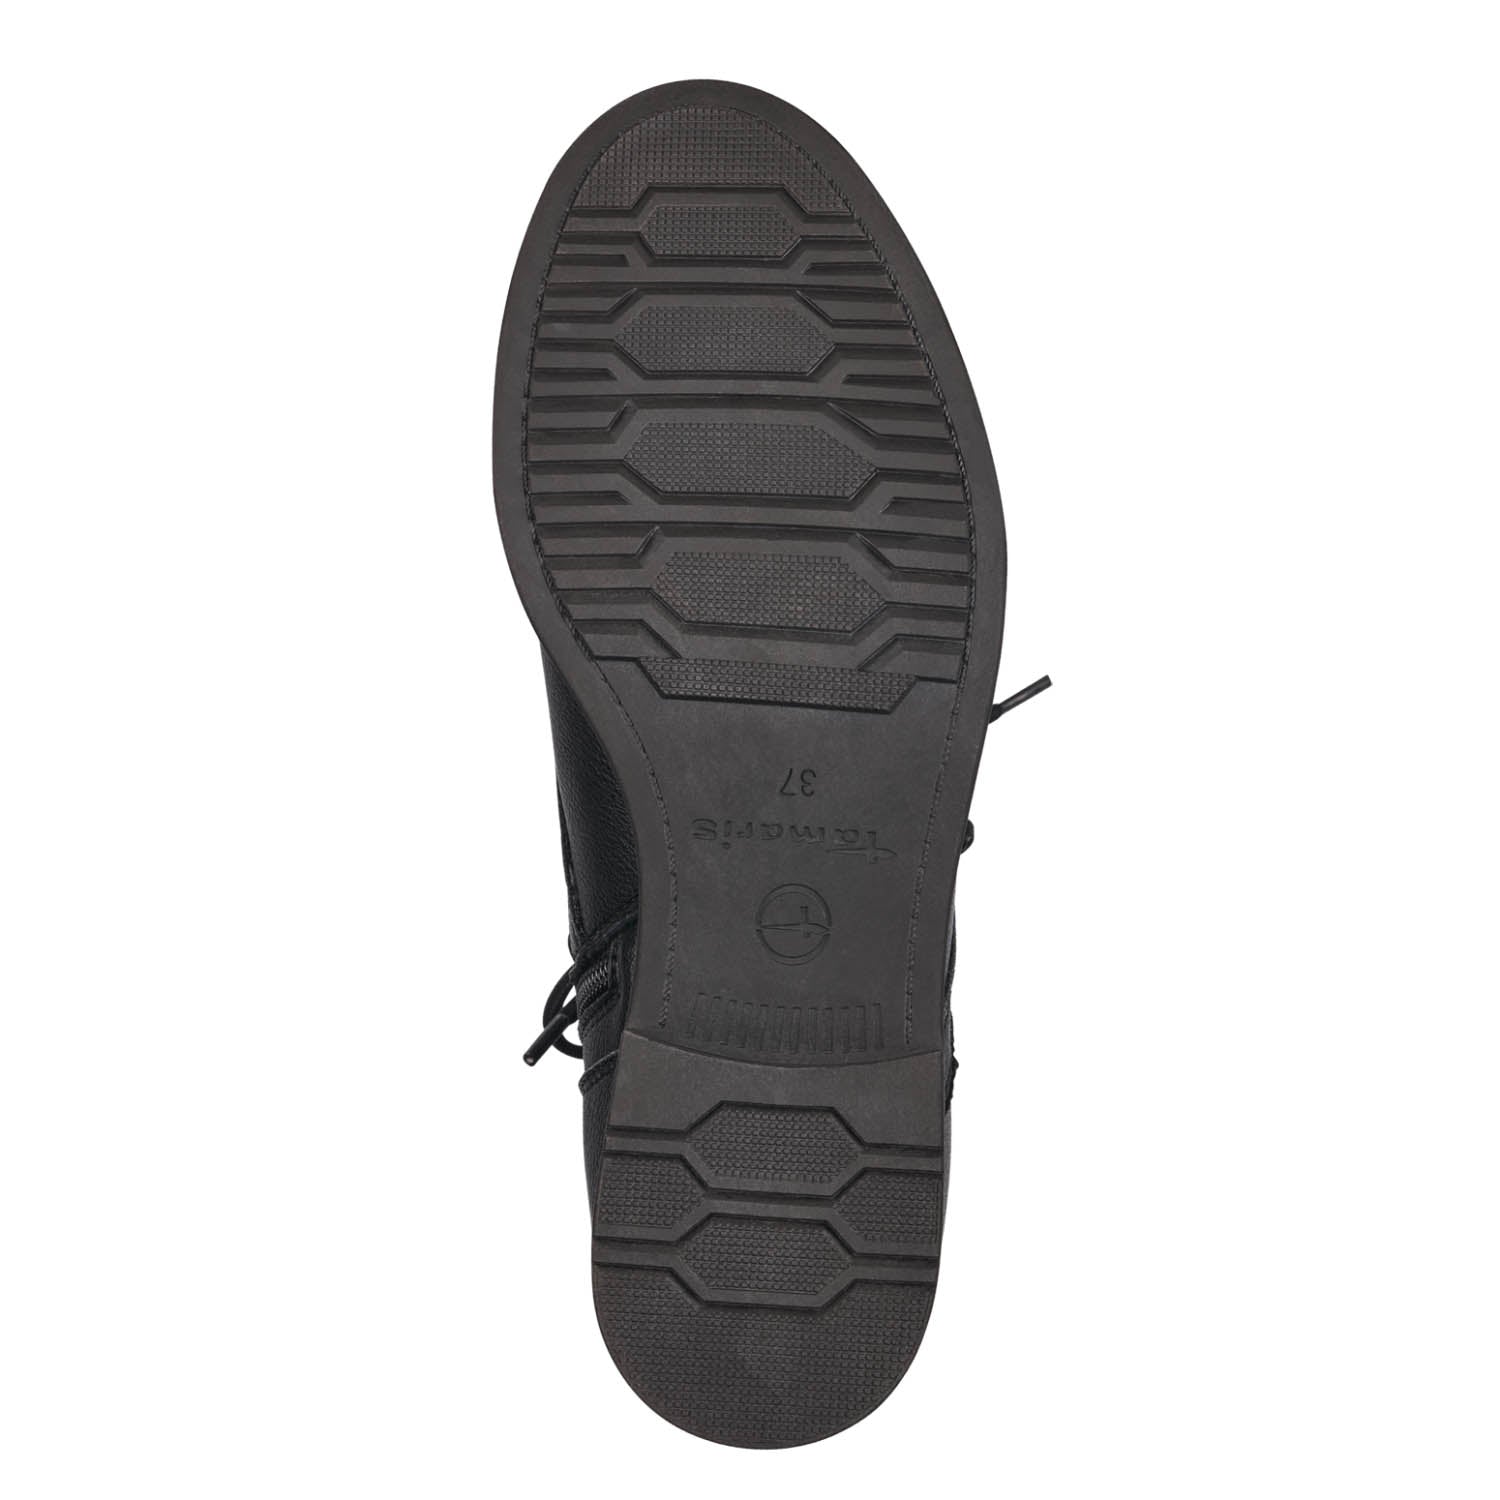 Image displaying the synthetic sole of the Tamaris boot.